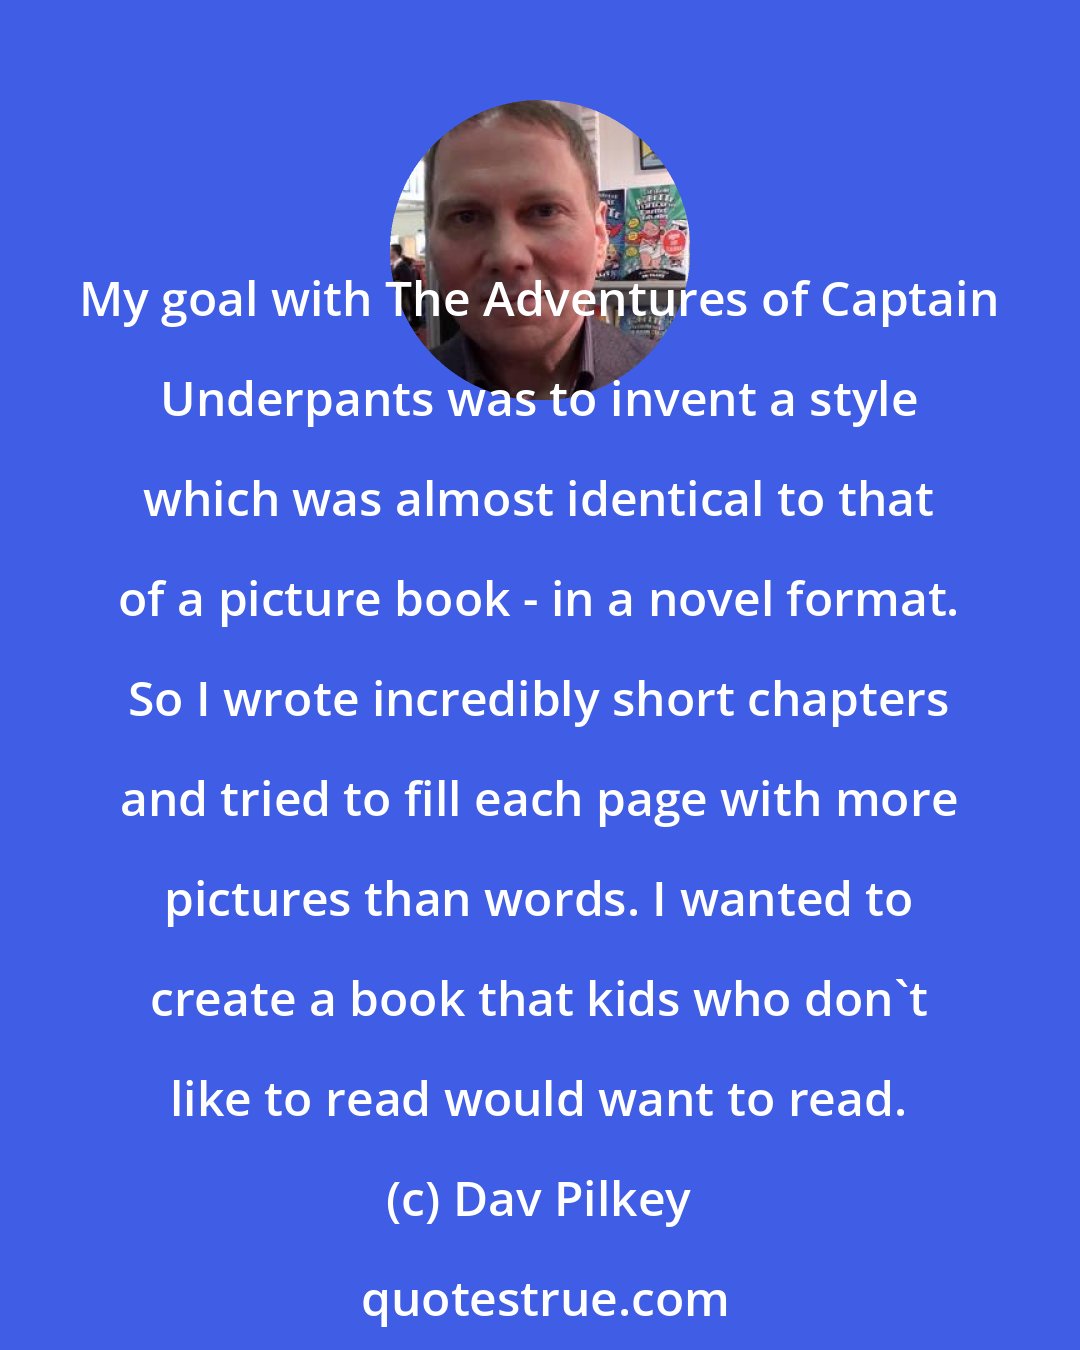 Dav Pilkey: My goal with The Adventures of Captain Underpants was to invent a style which was almost identical to that of a picture book - in a novel format. So I wrote incredibly short chapters and tried to fill each page with more pictures than words. I wanted to create a book that kids who don't like to read would want to read.